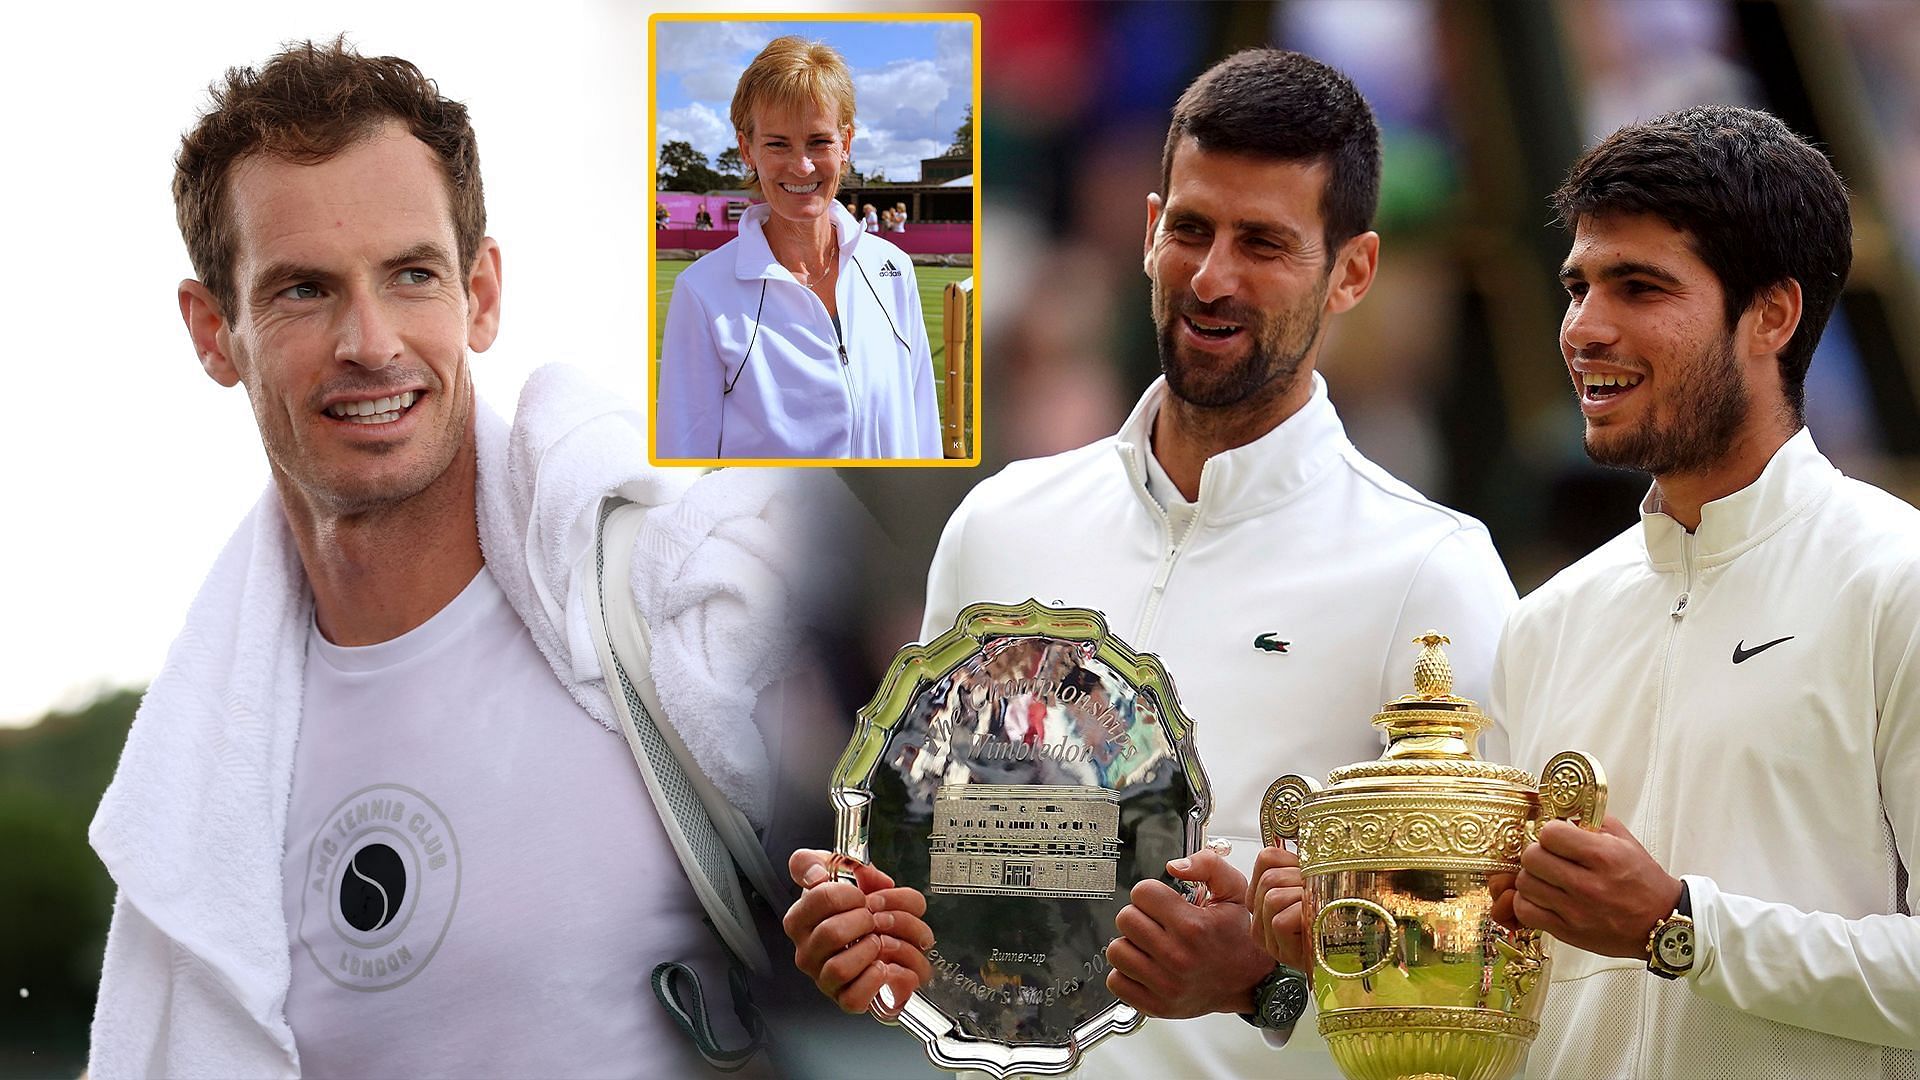 Judy Murray urges young players to be like her son as Andy Murray reacts to Wimbledon final.